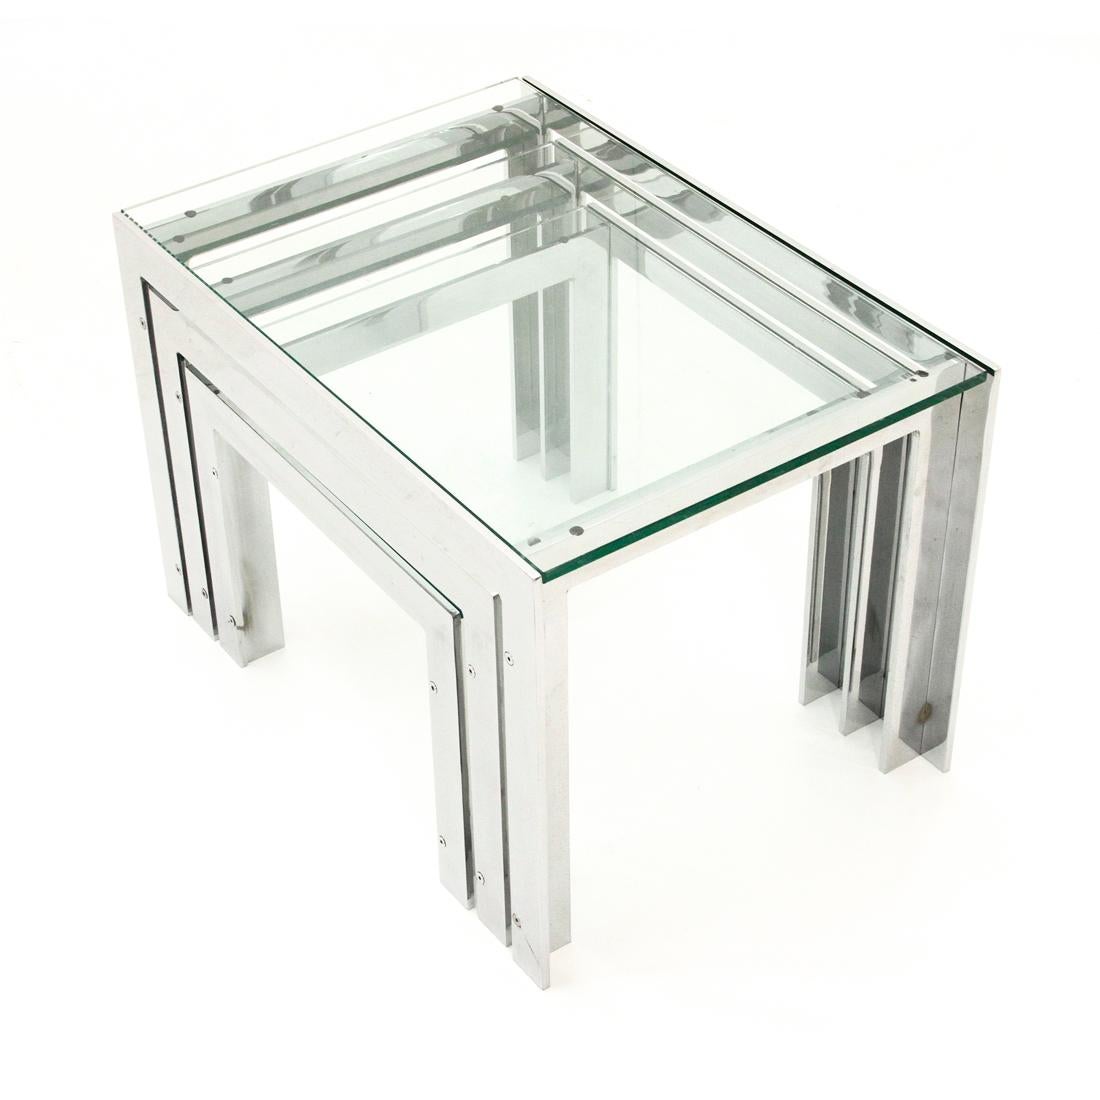 Mid-Century Modern Italian Steel and Glass Nesting Tables by Alberto Rosselli for Saporiti, 1970s